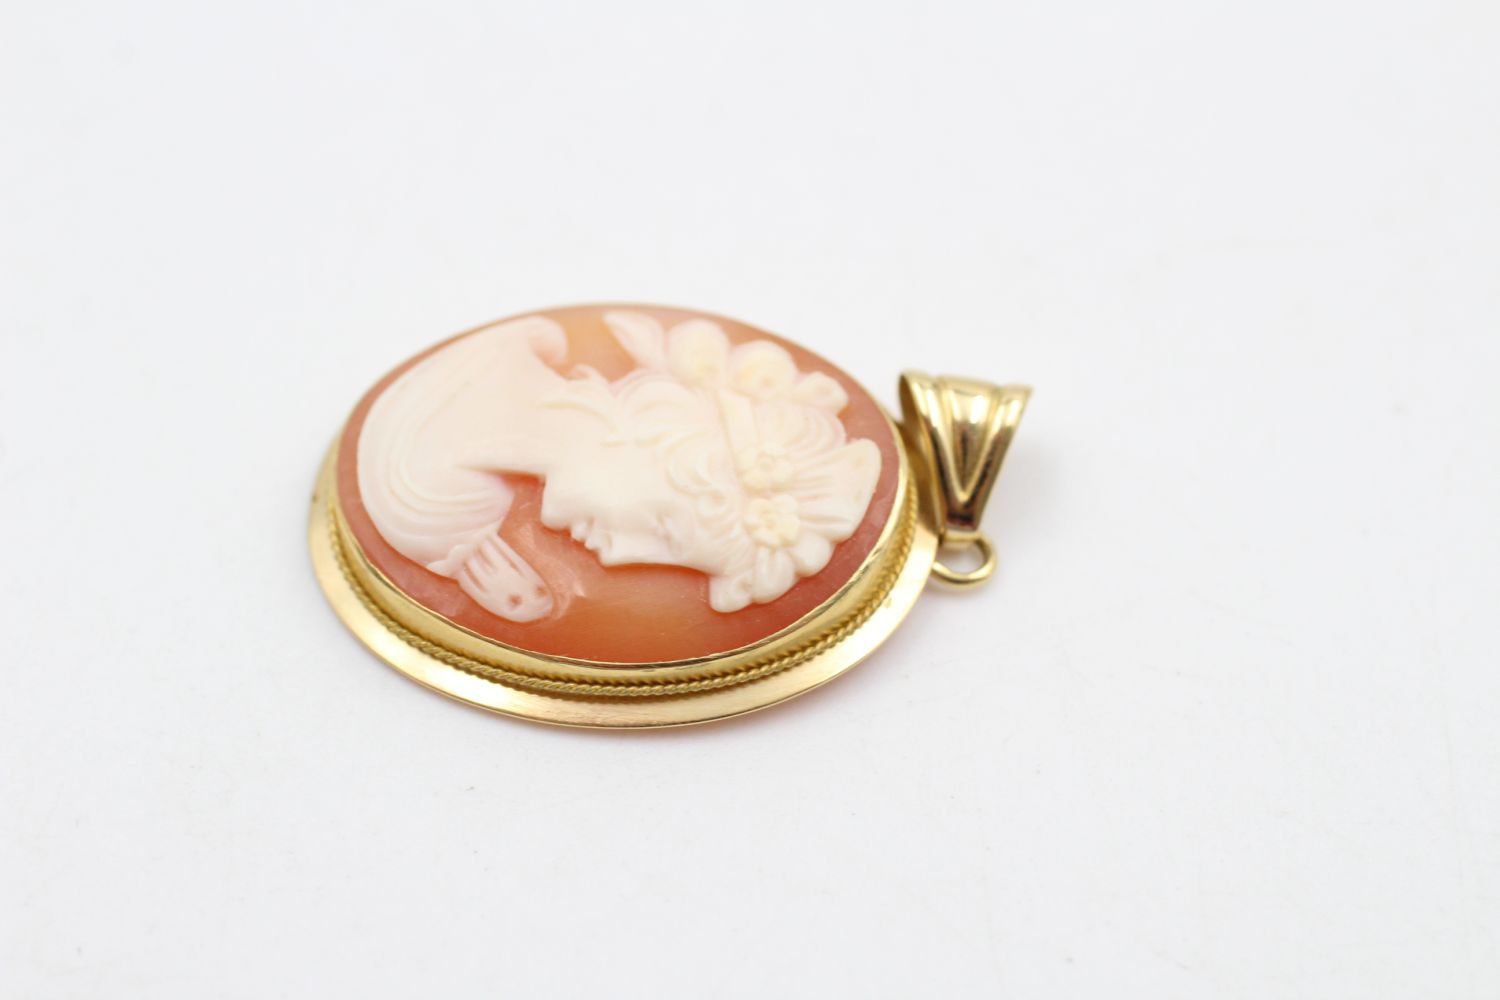 18ct Gold frame shell cameo brooch 4.6 grams gross - Image 3 of 4